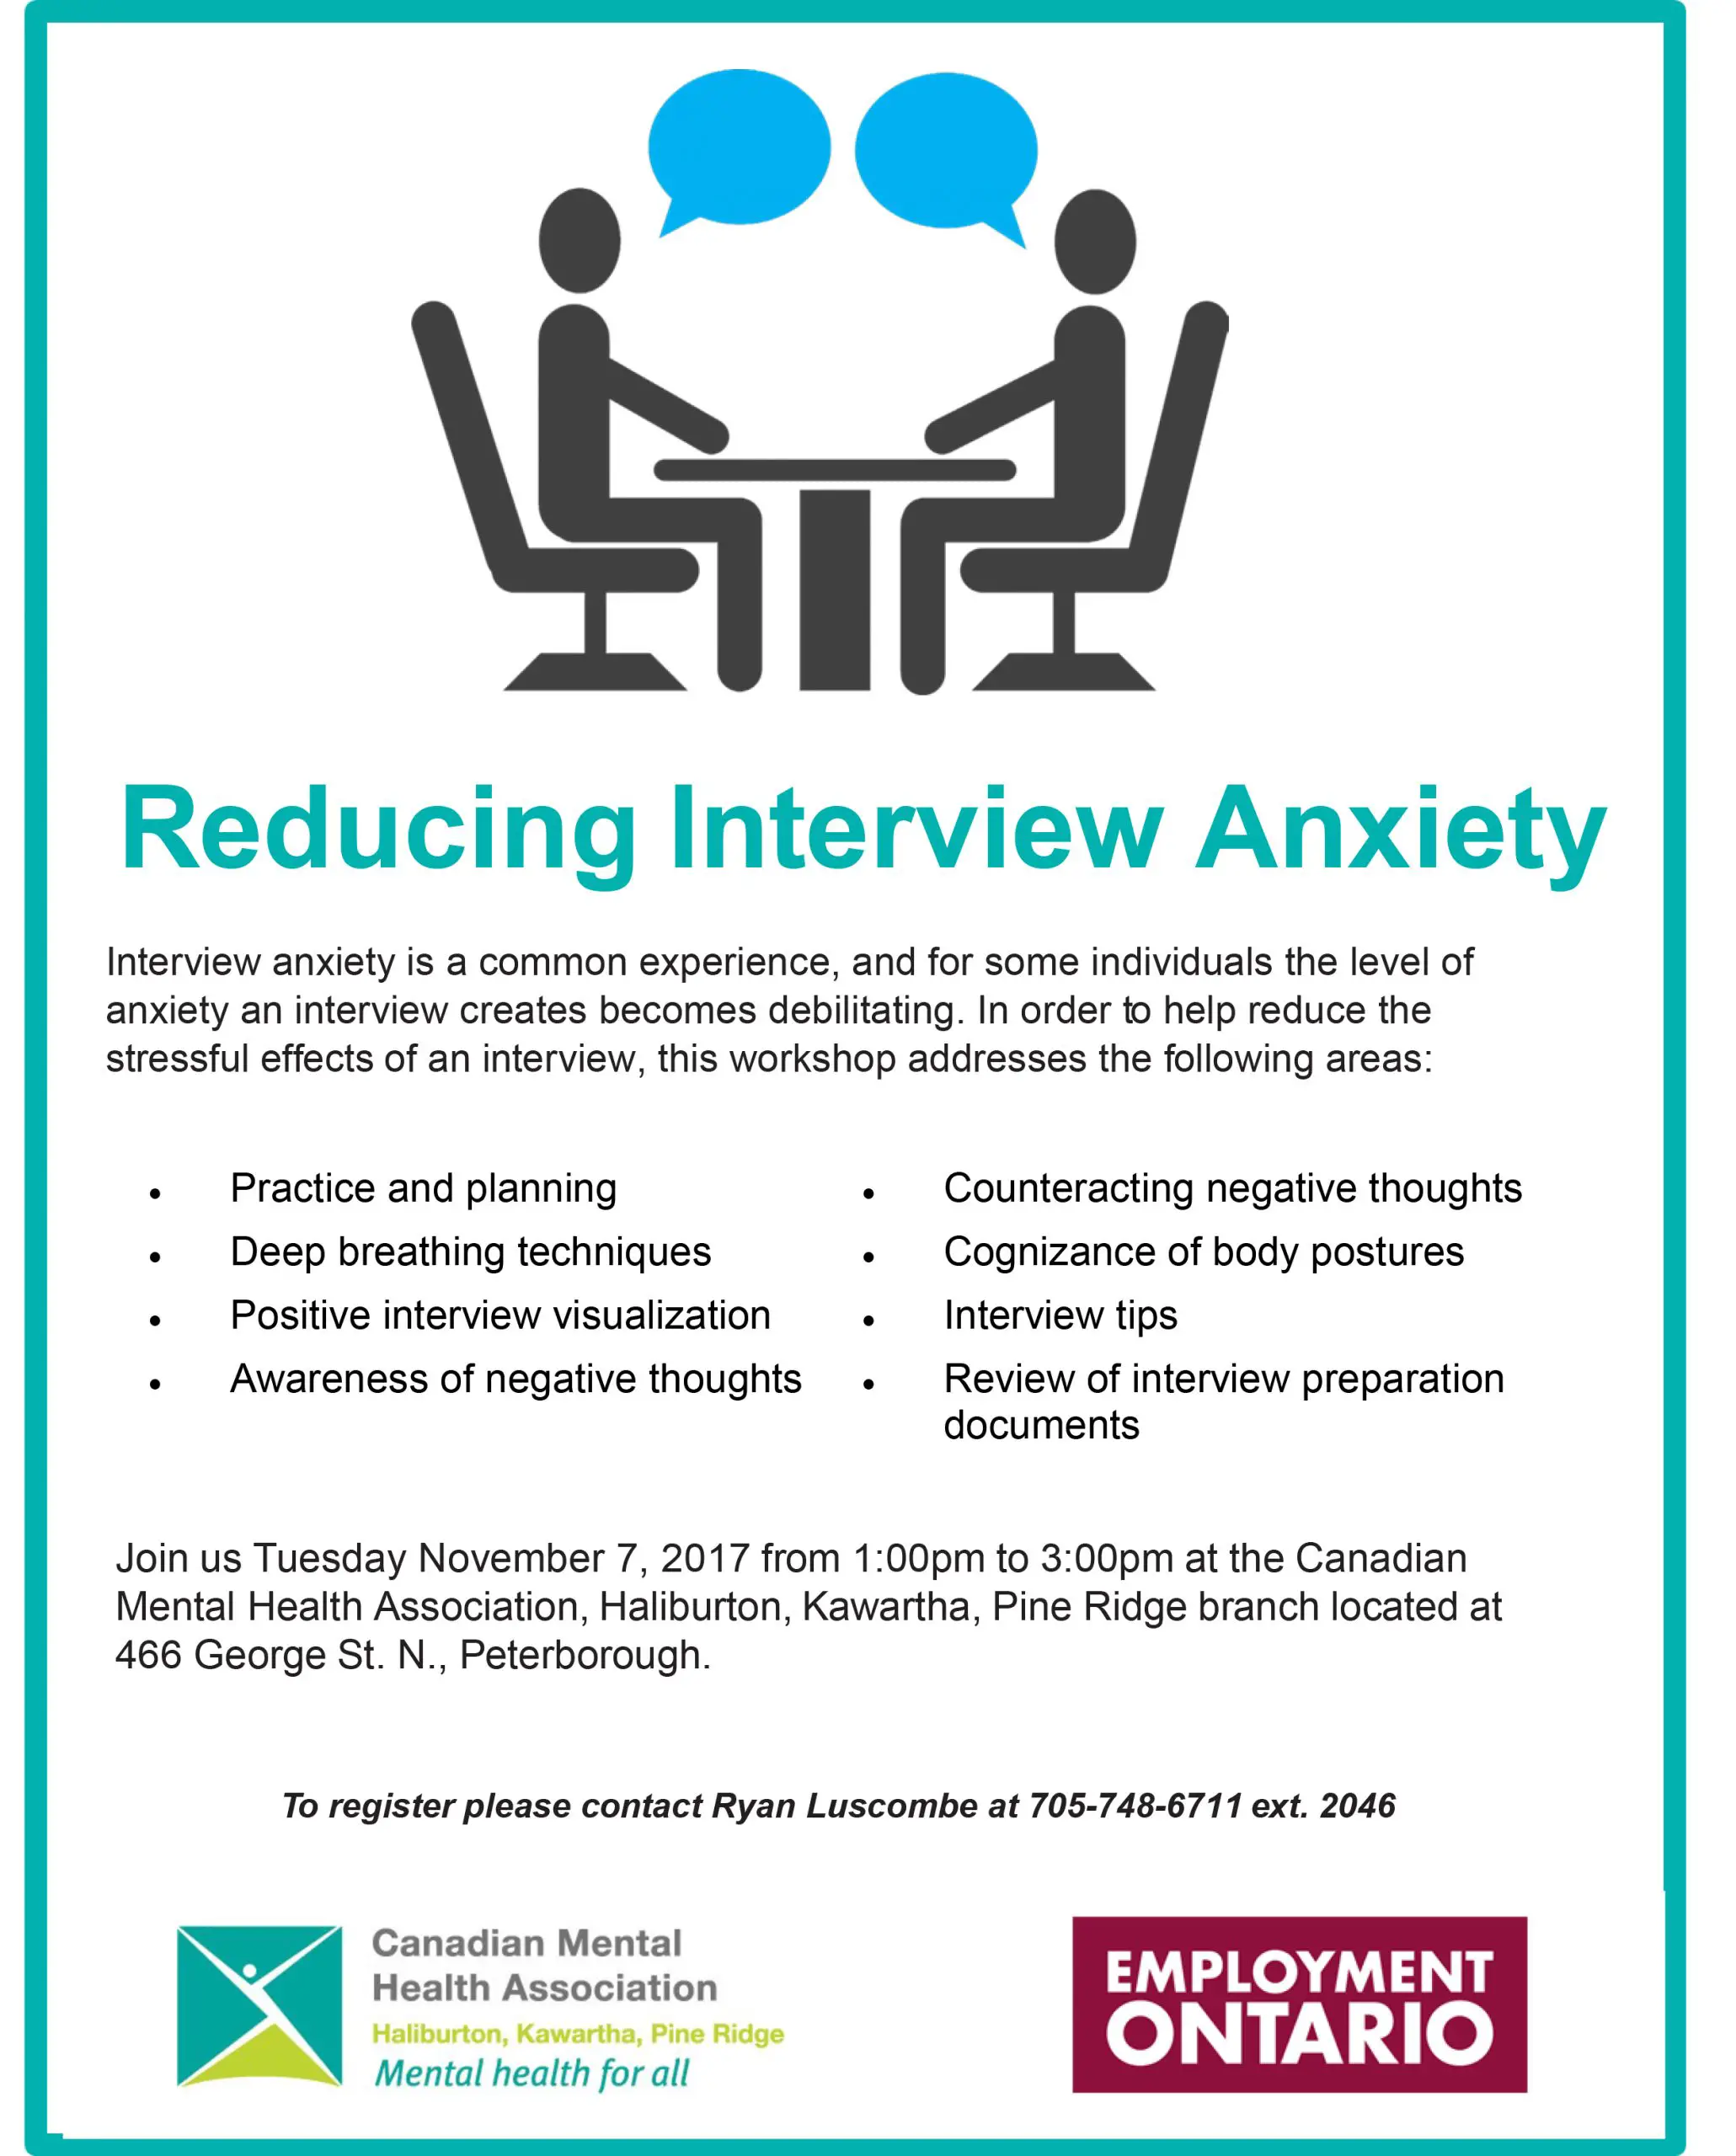 Reducing Interview Anxiety Workshop